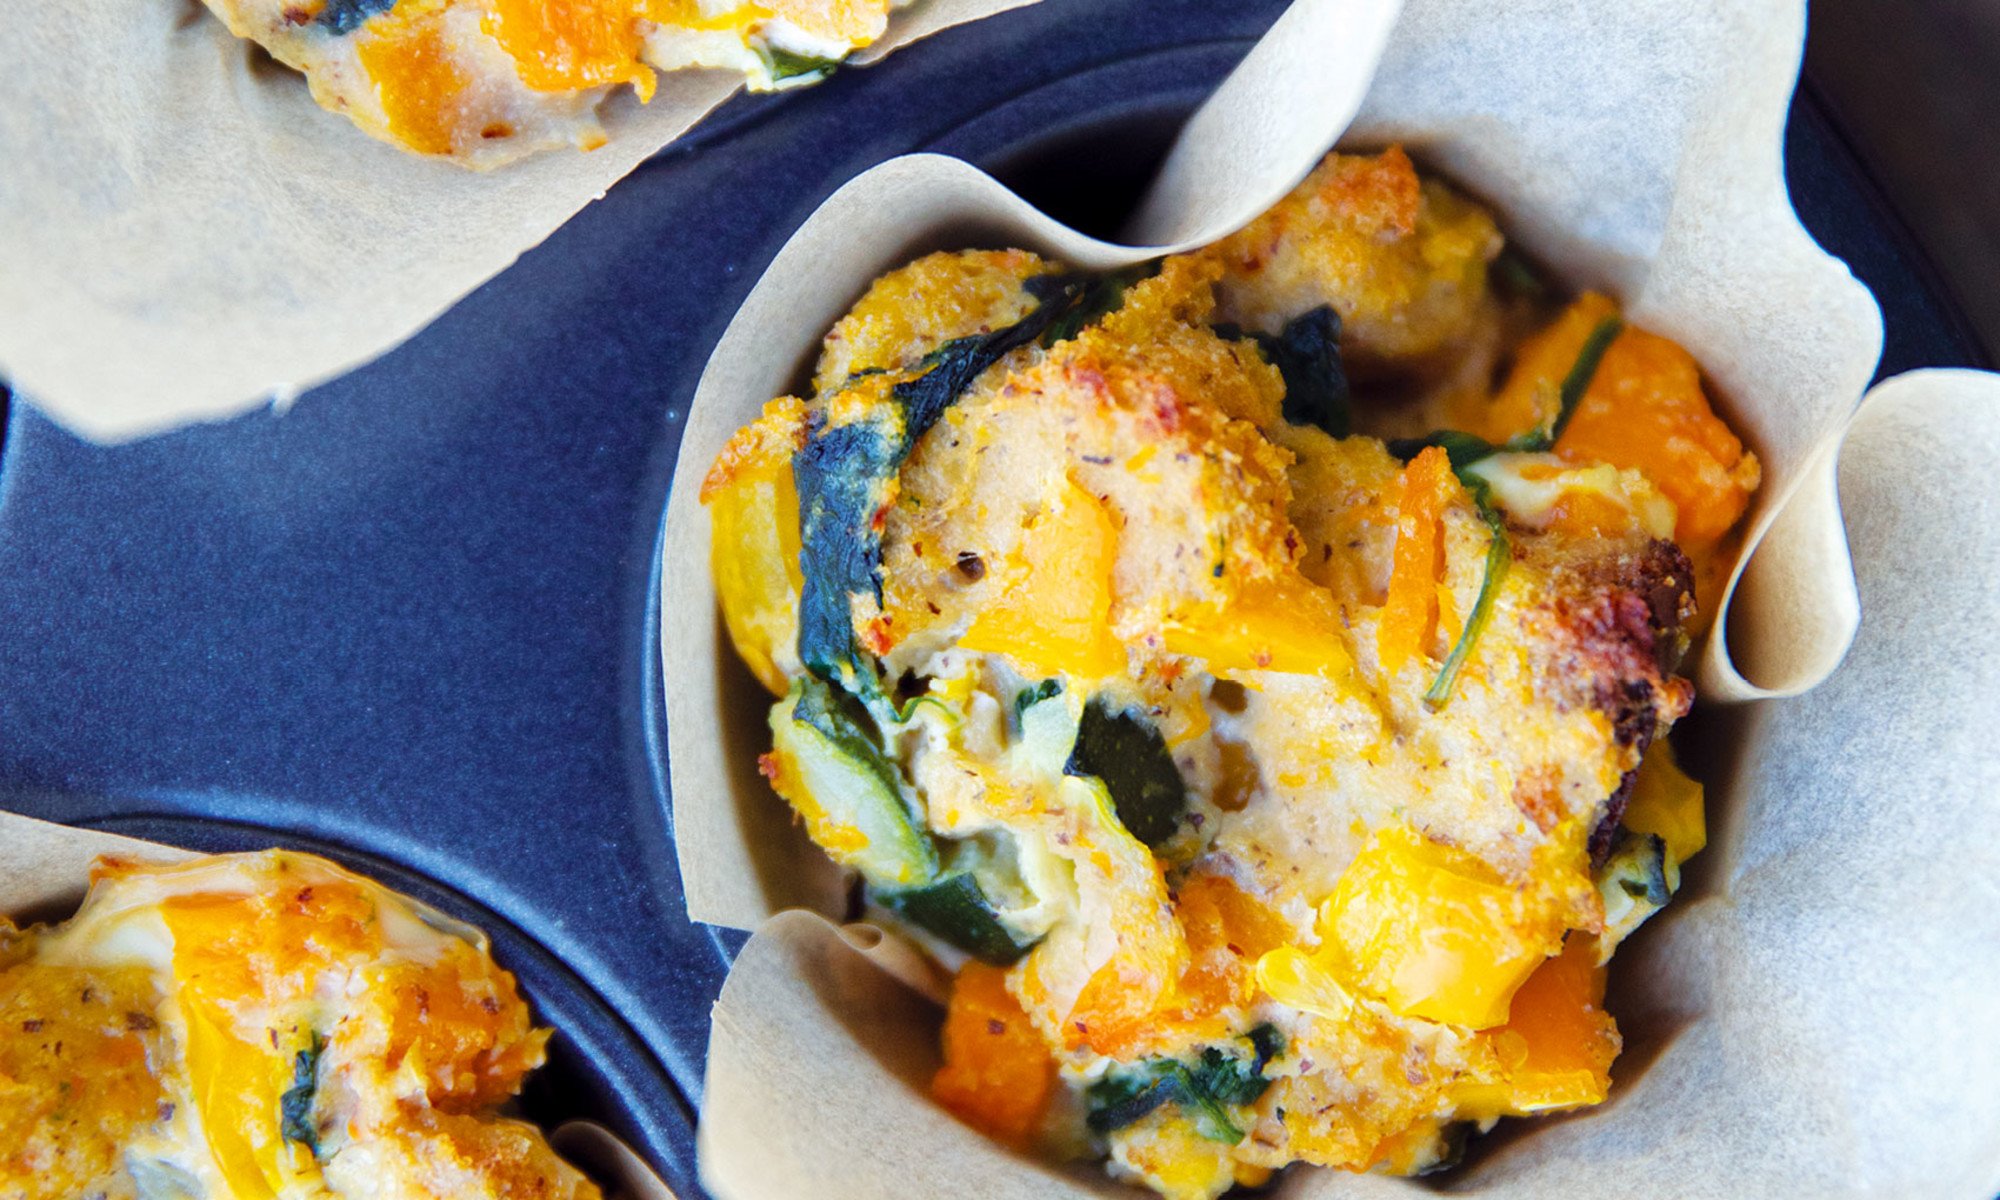 These Eggy Bread & Veggie Muffins Are The Perfect Make-Ahead, No-Waste Meal